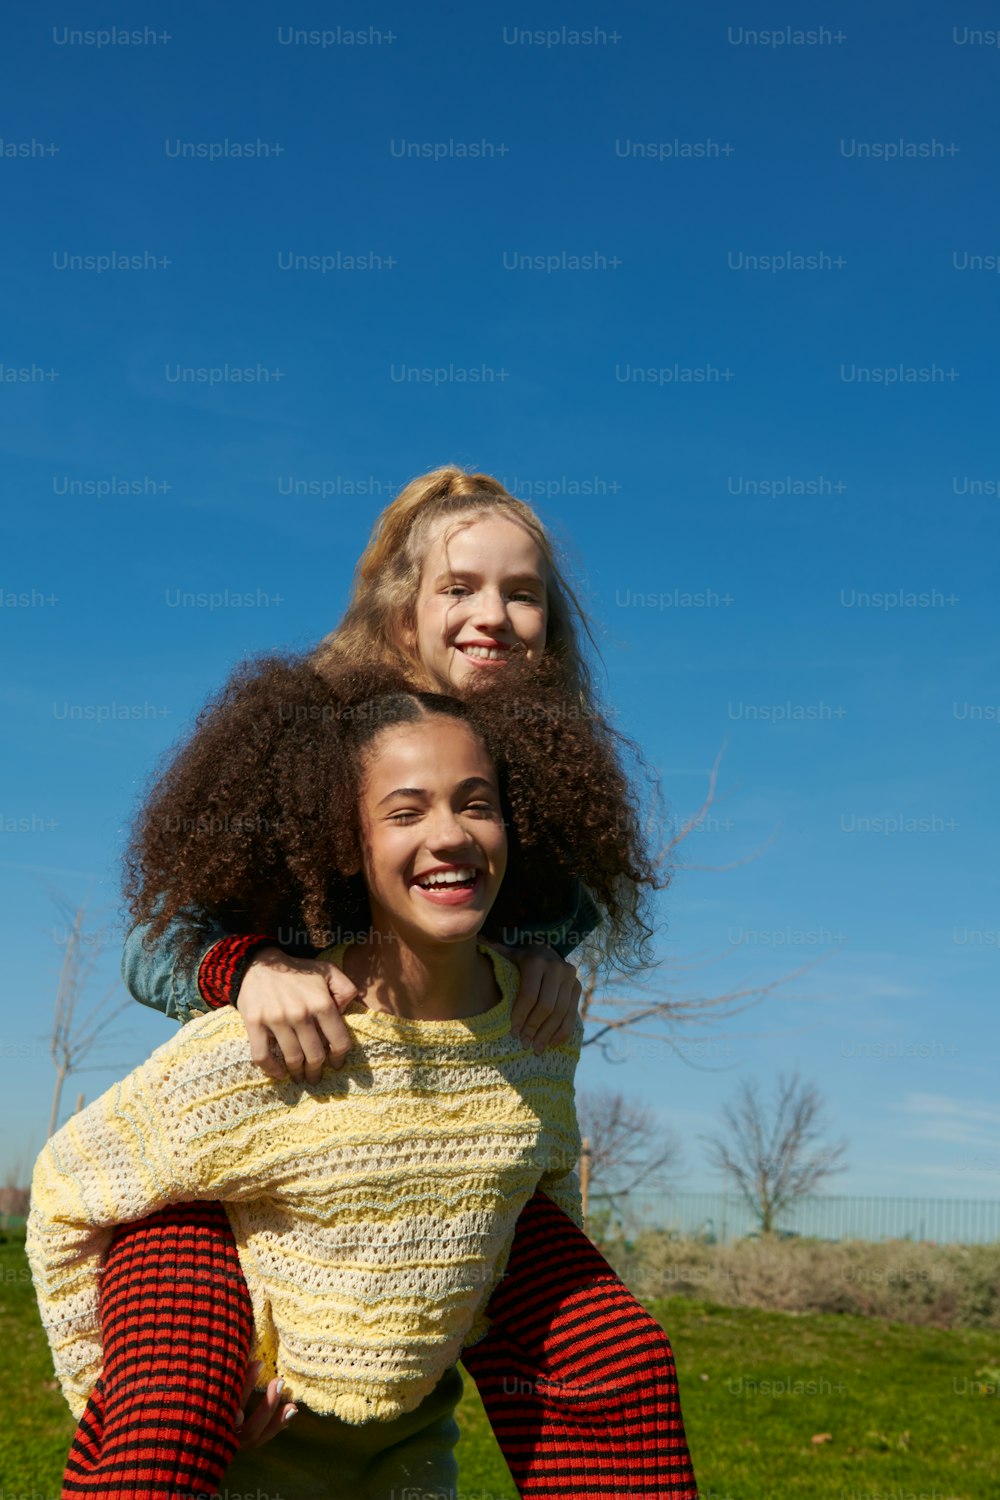 two young girls hugging each other in a field